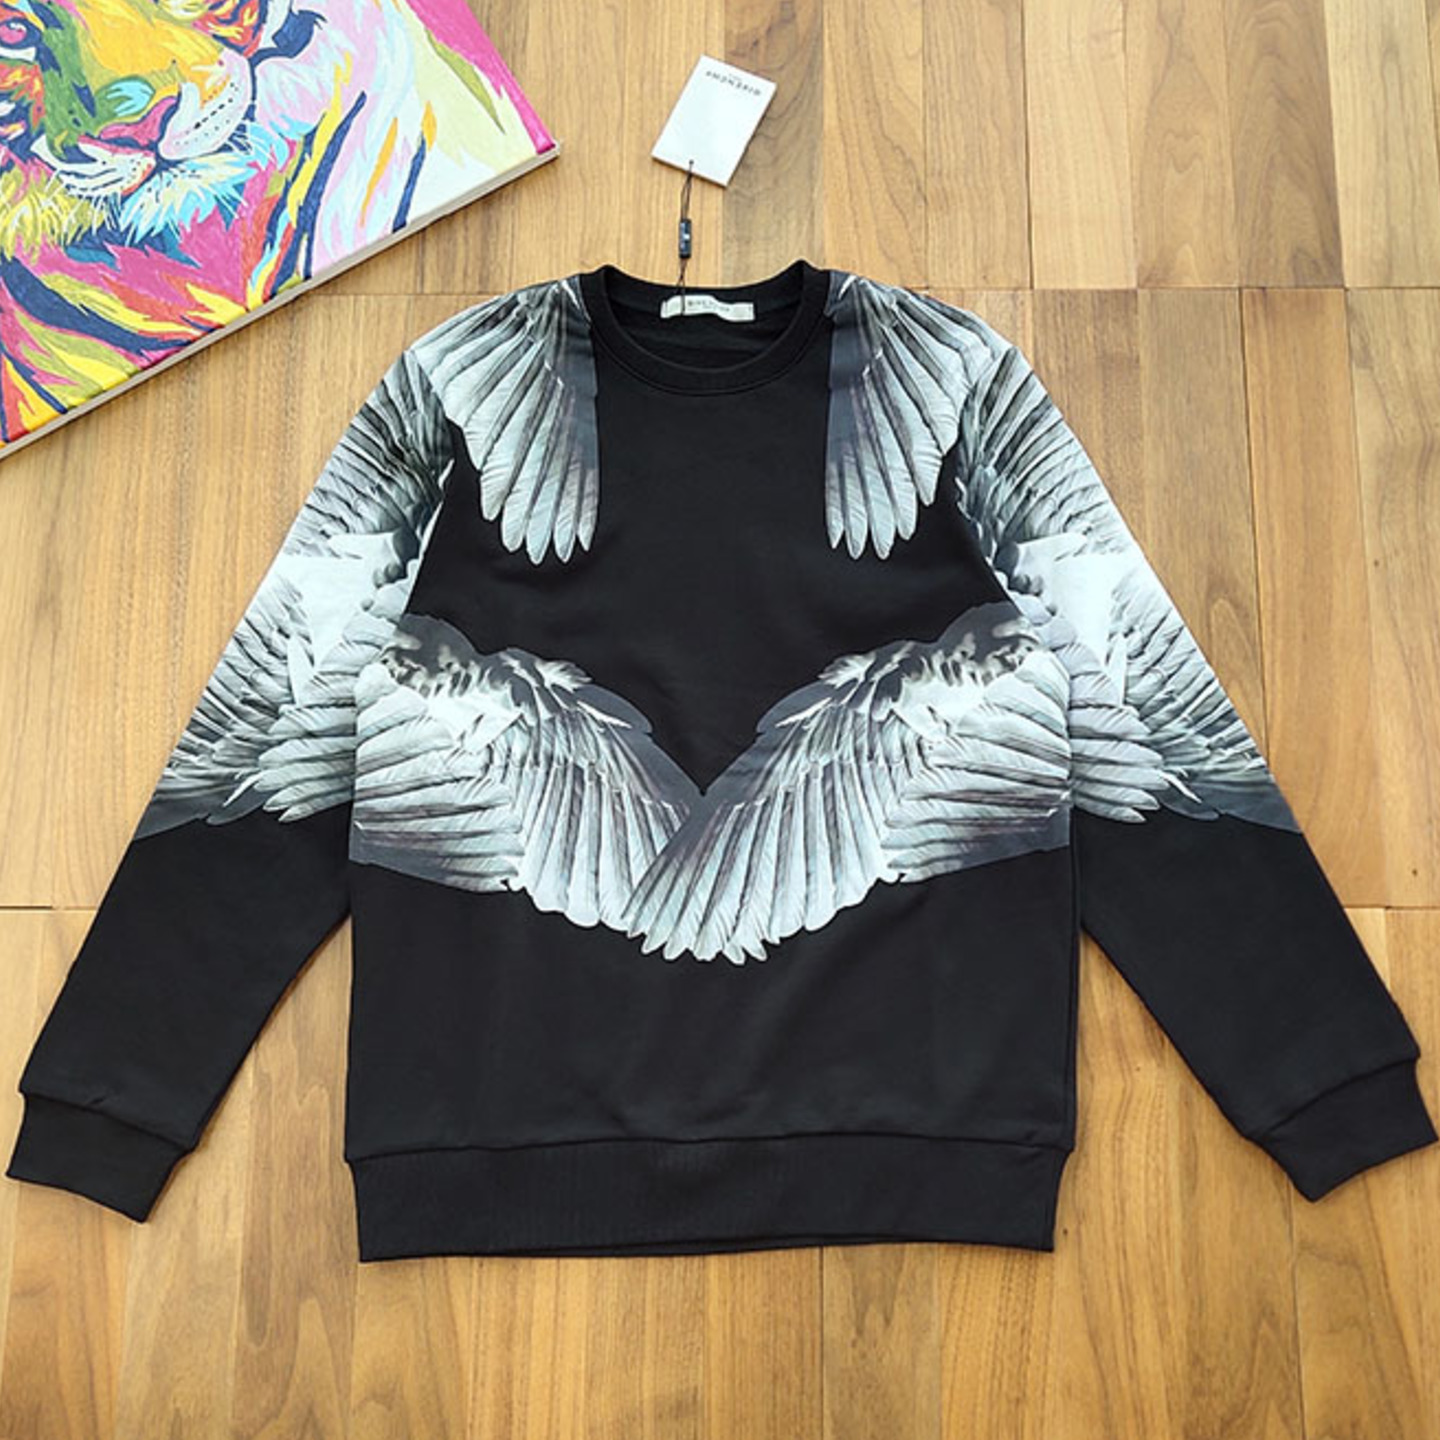 Givenchy Feathered Wing Print Sweatshirt